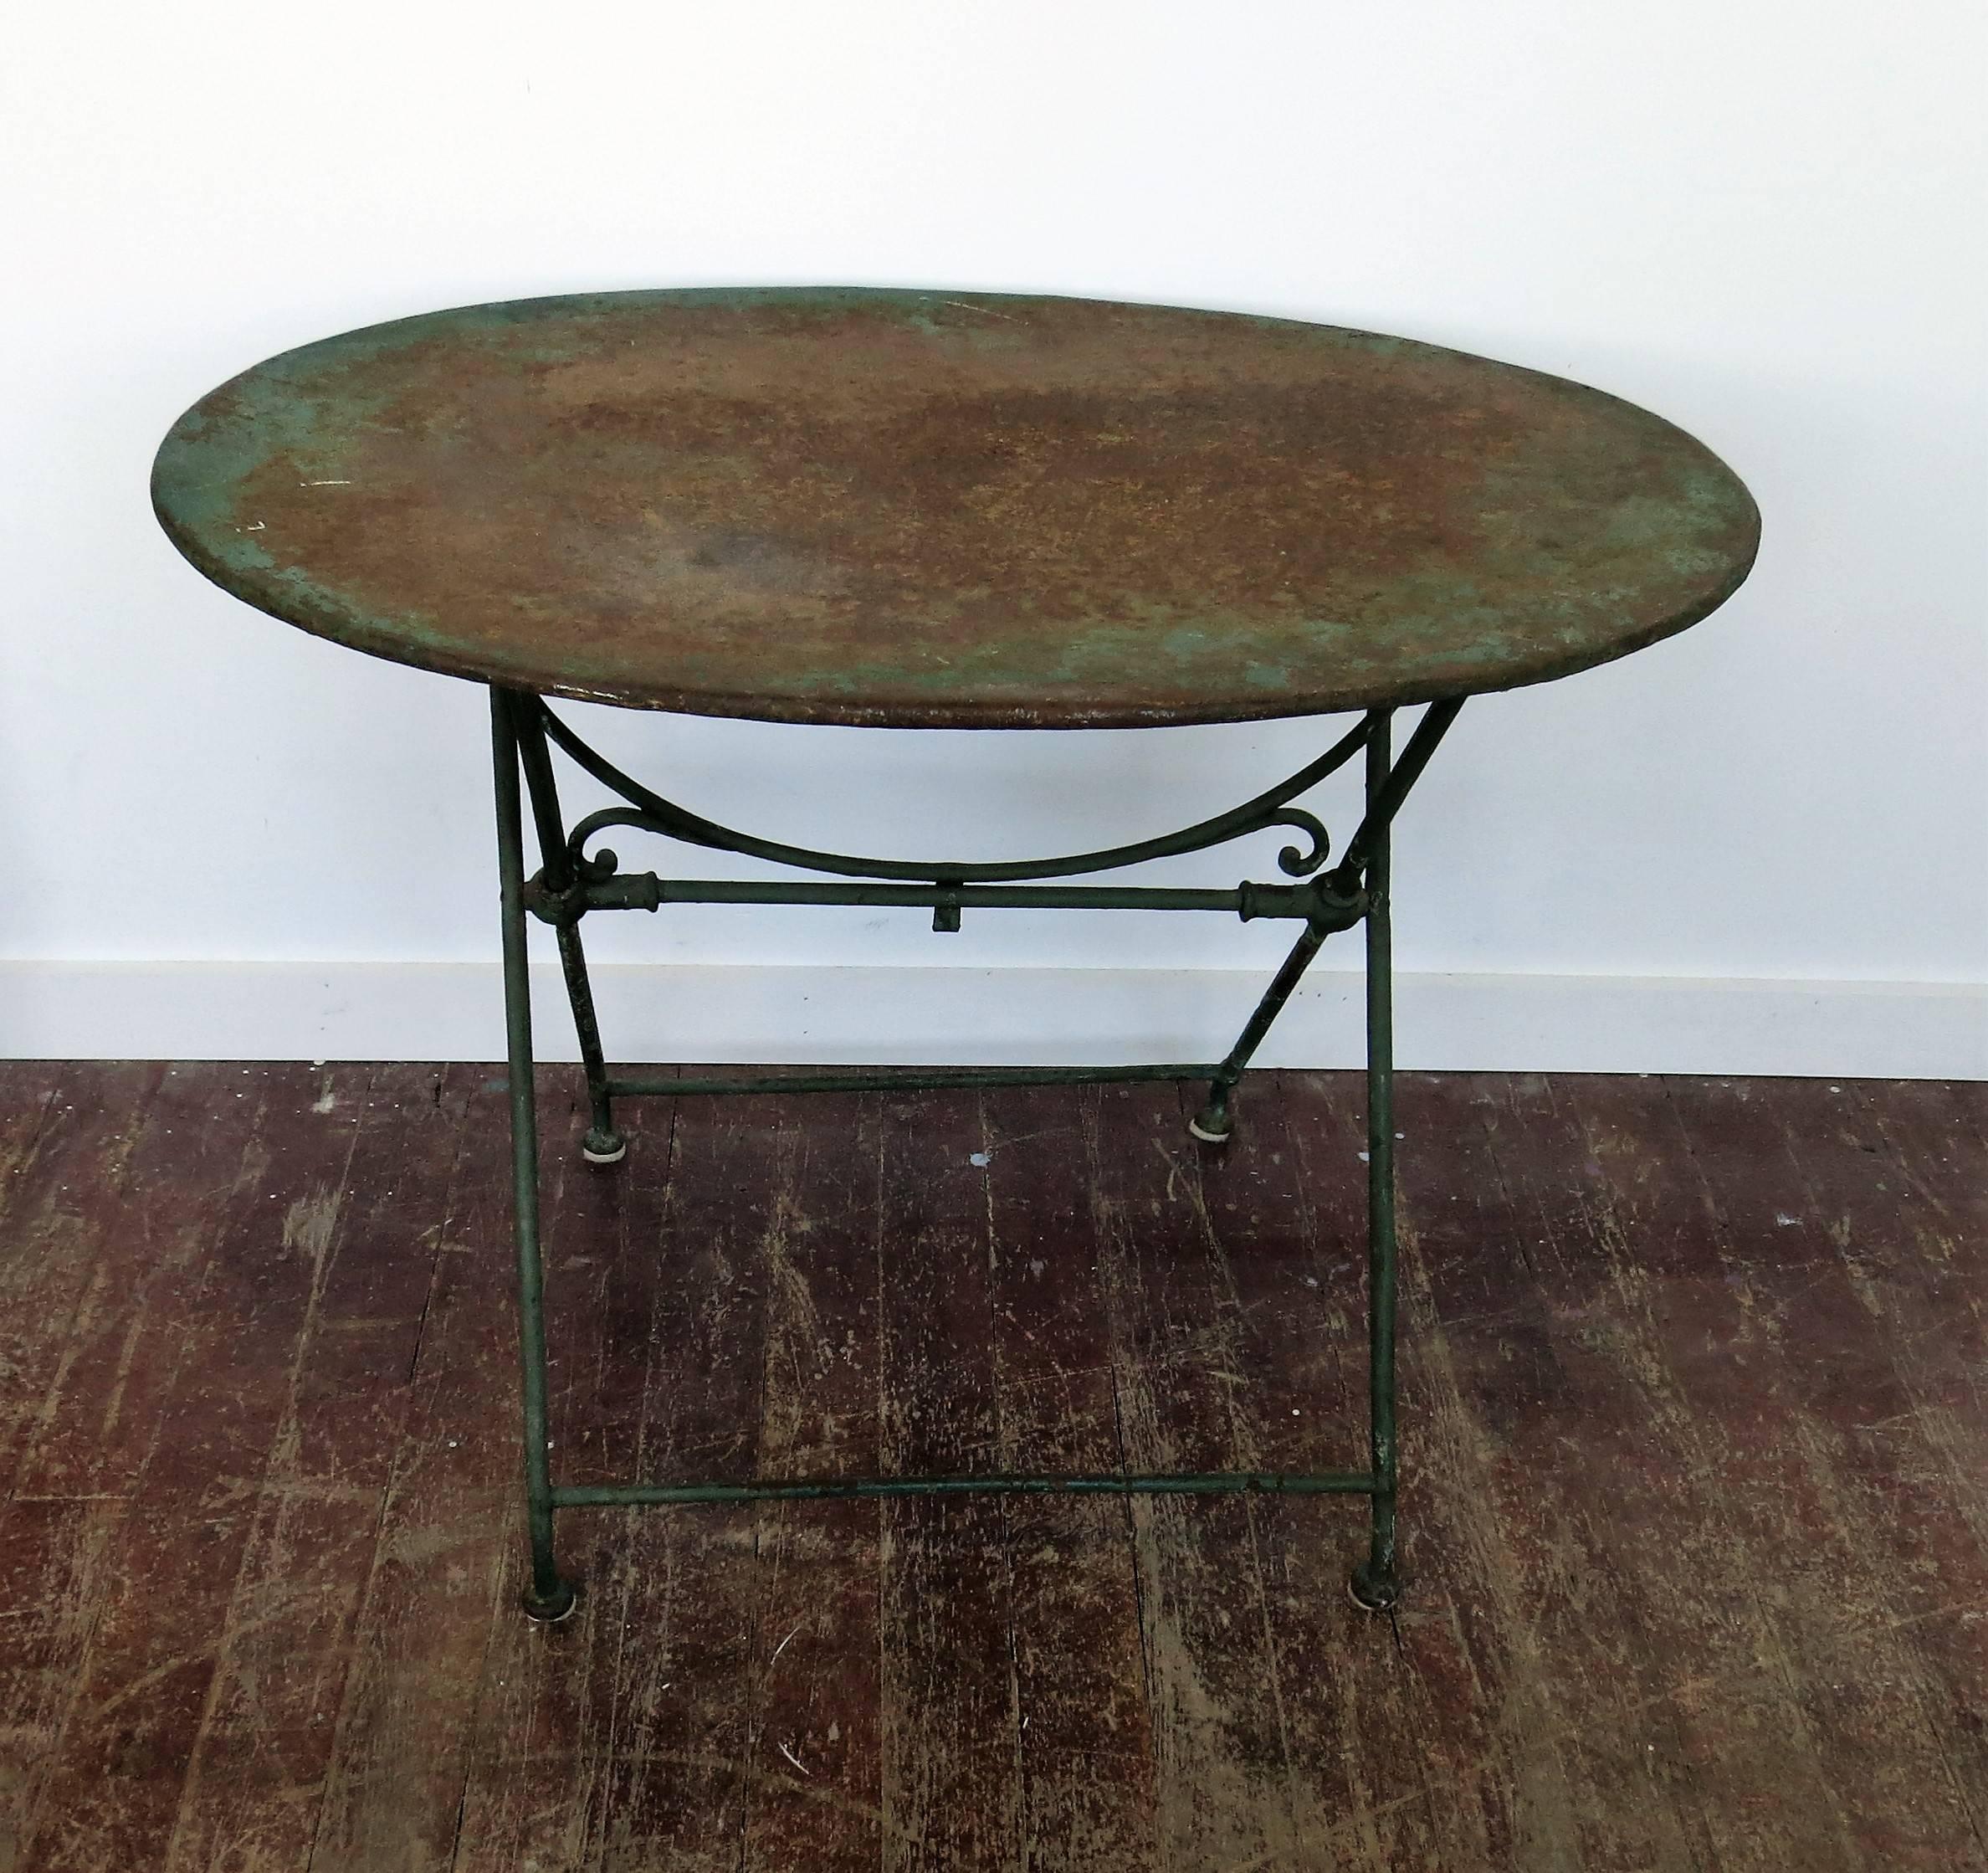 French iron folding table circa 1900 with a nicely rusted top with a few small holes. The top is 24